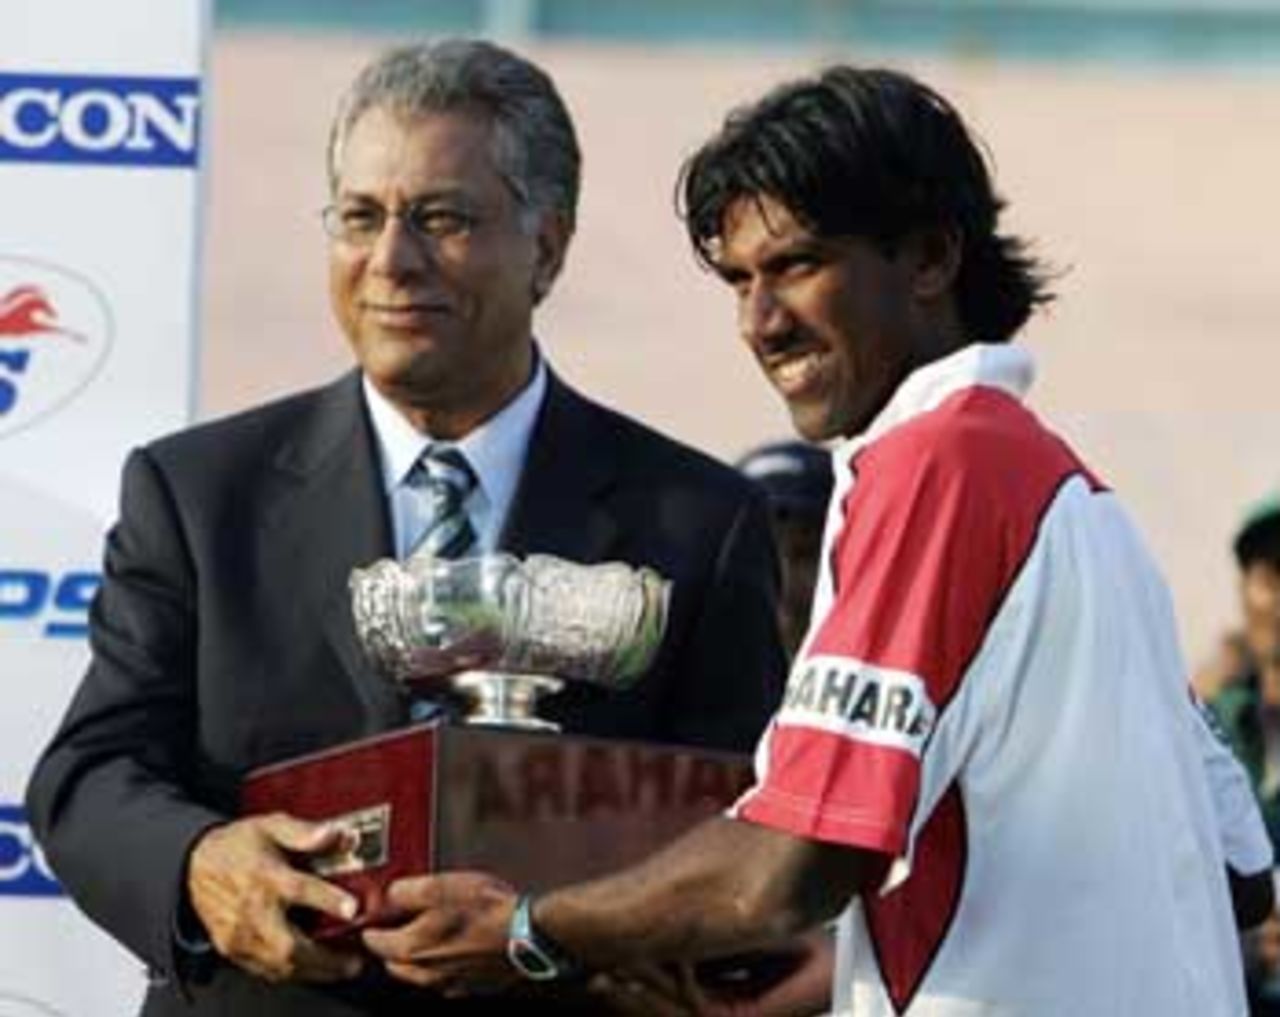 In all this L Balaji, who took nine wickets in the match, was not forgotten, India v Pakistan, 1st Test, Mohali, 5th day, March 12, 2005